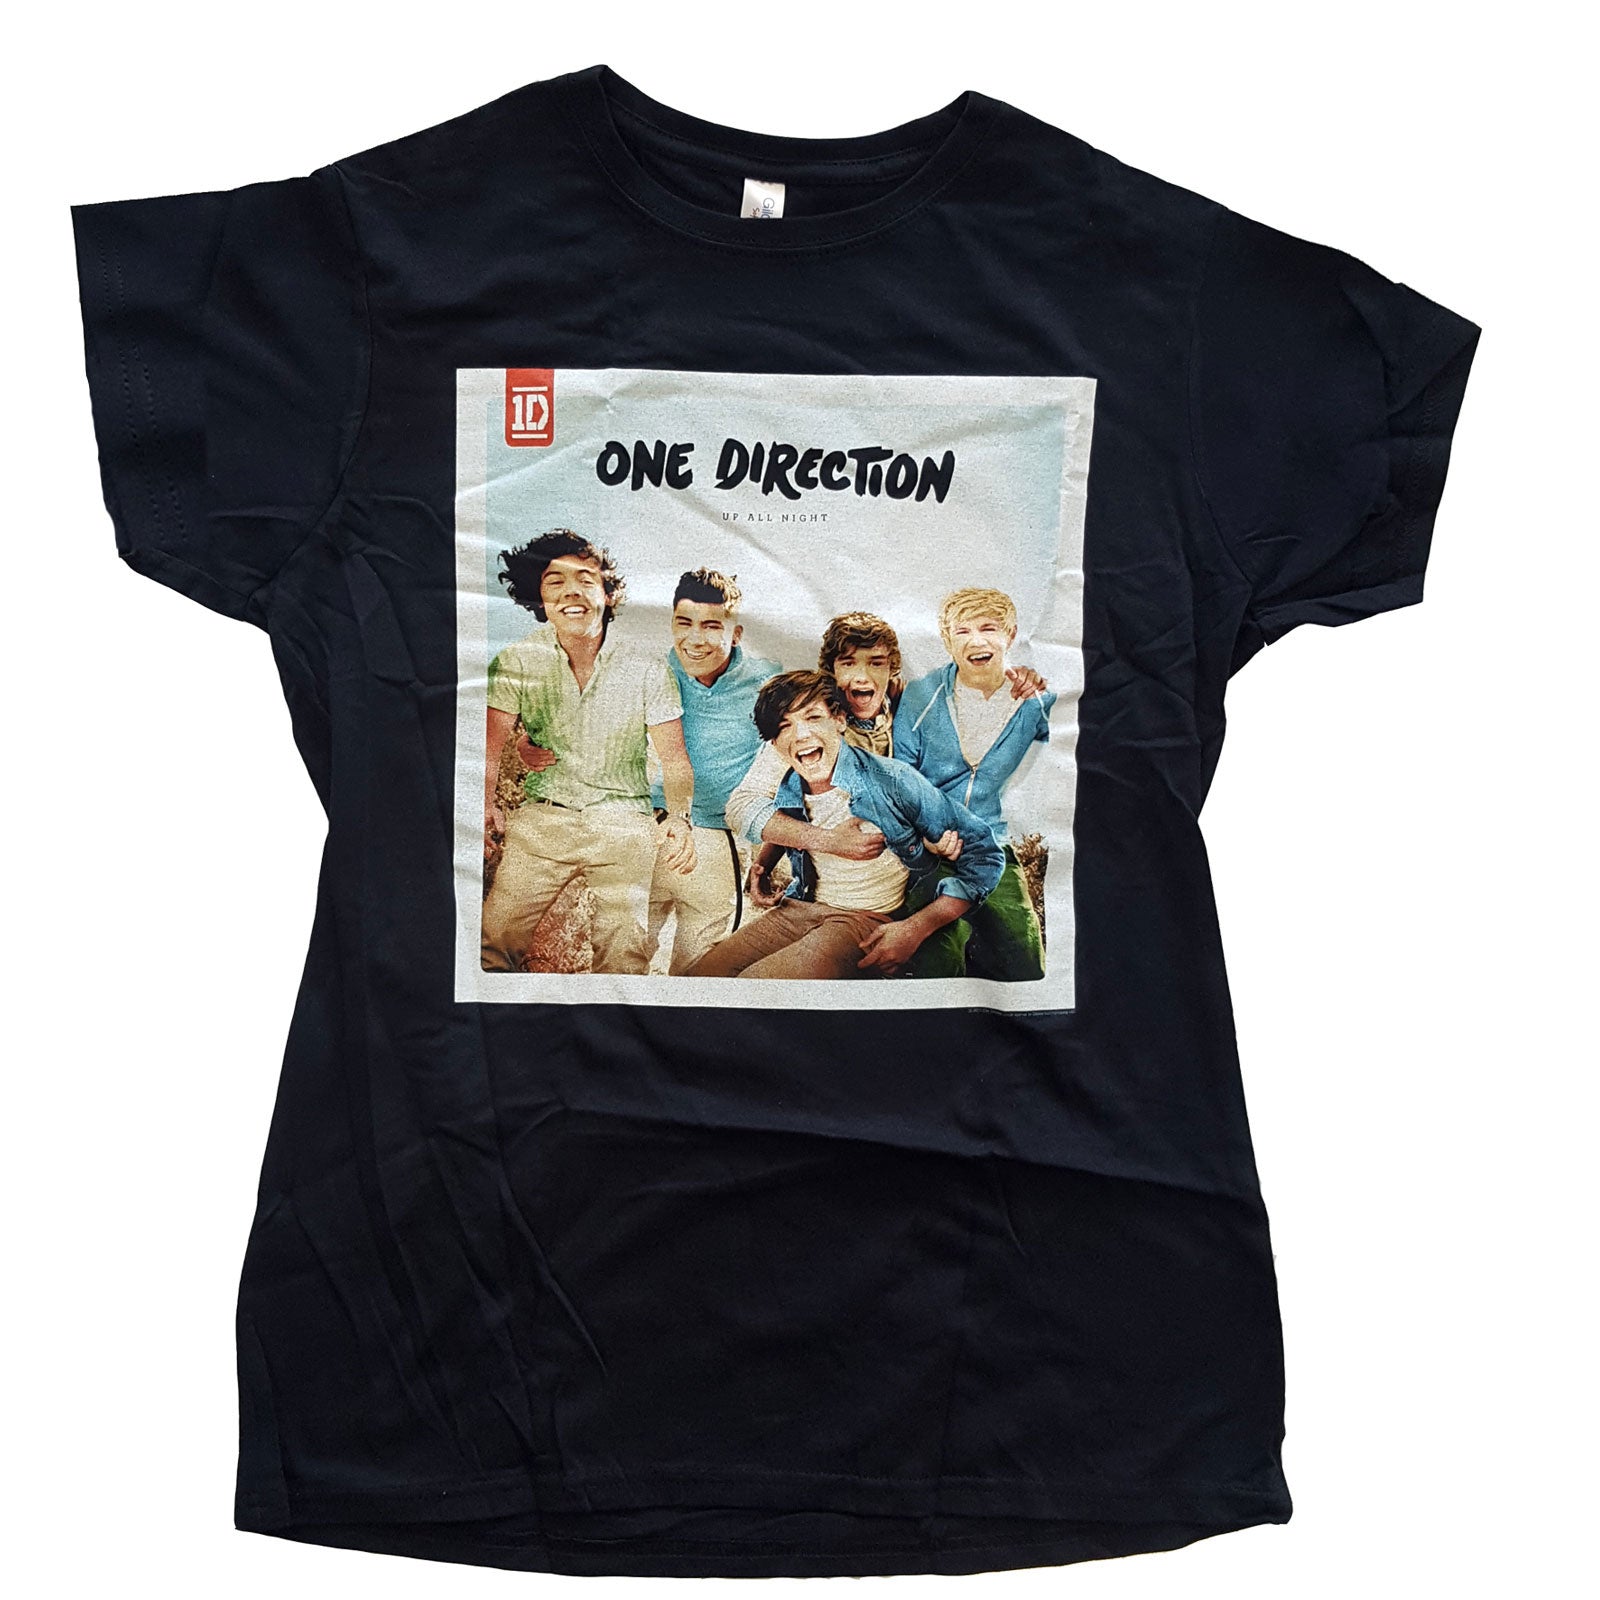 One Direction Ladies T-Shirt: Up All Night (Skinny Fit)